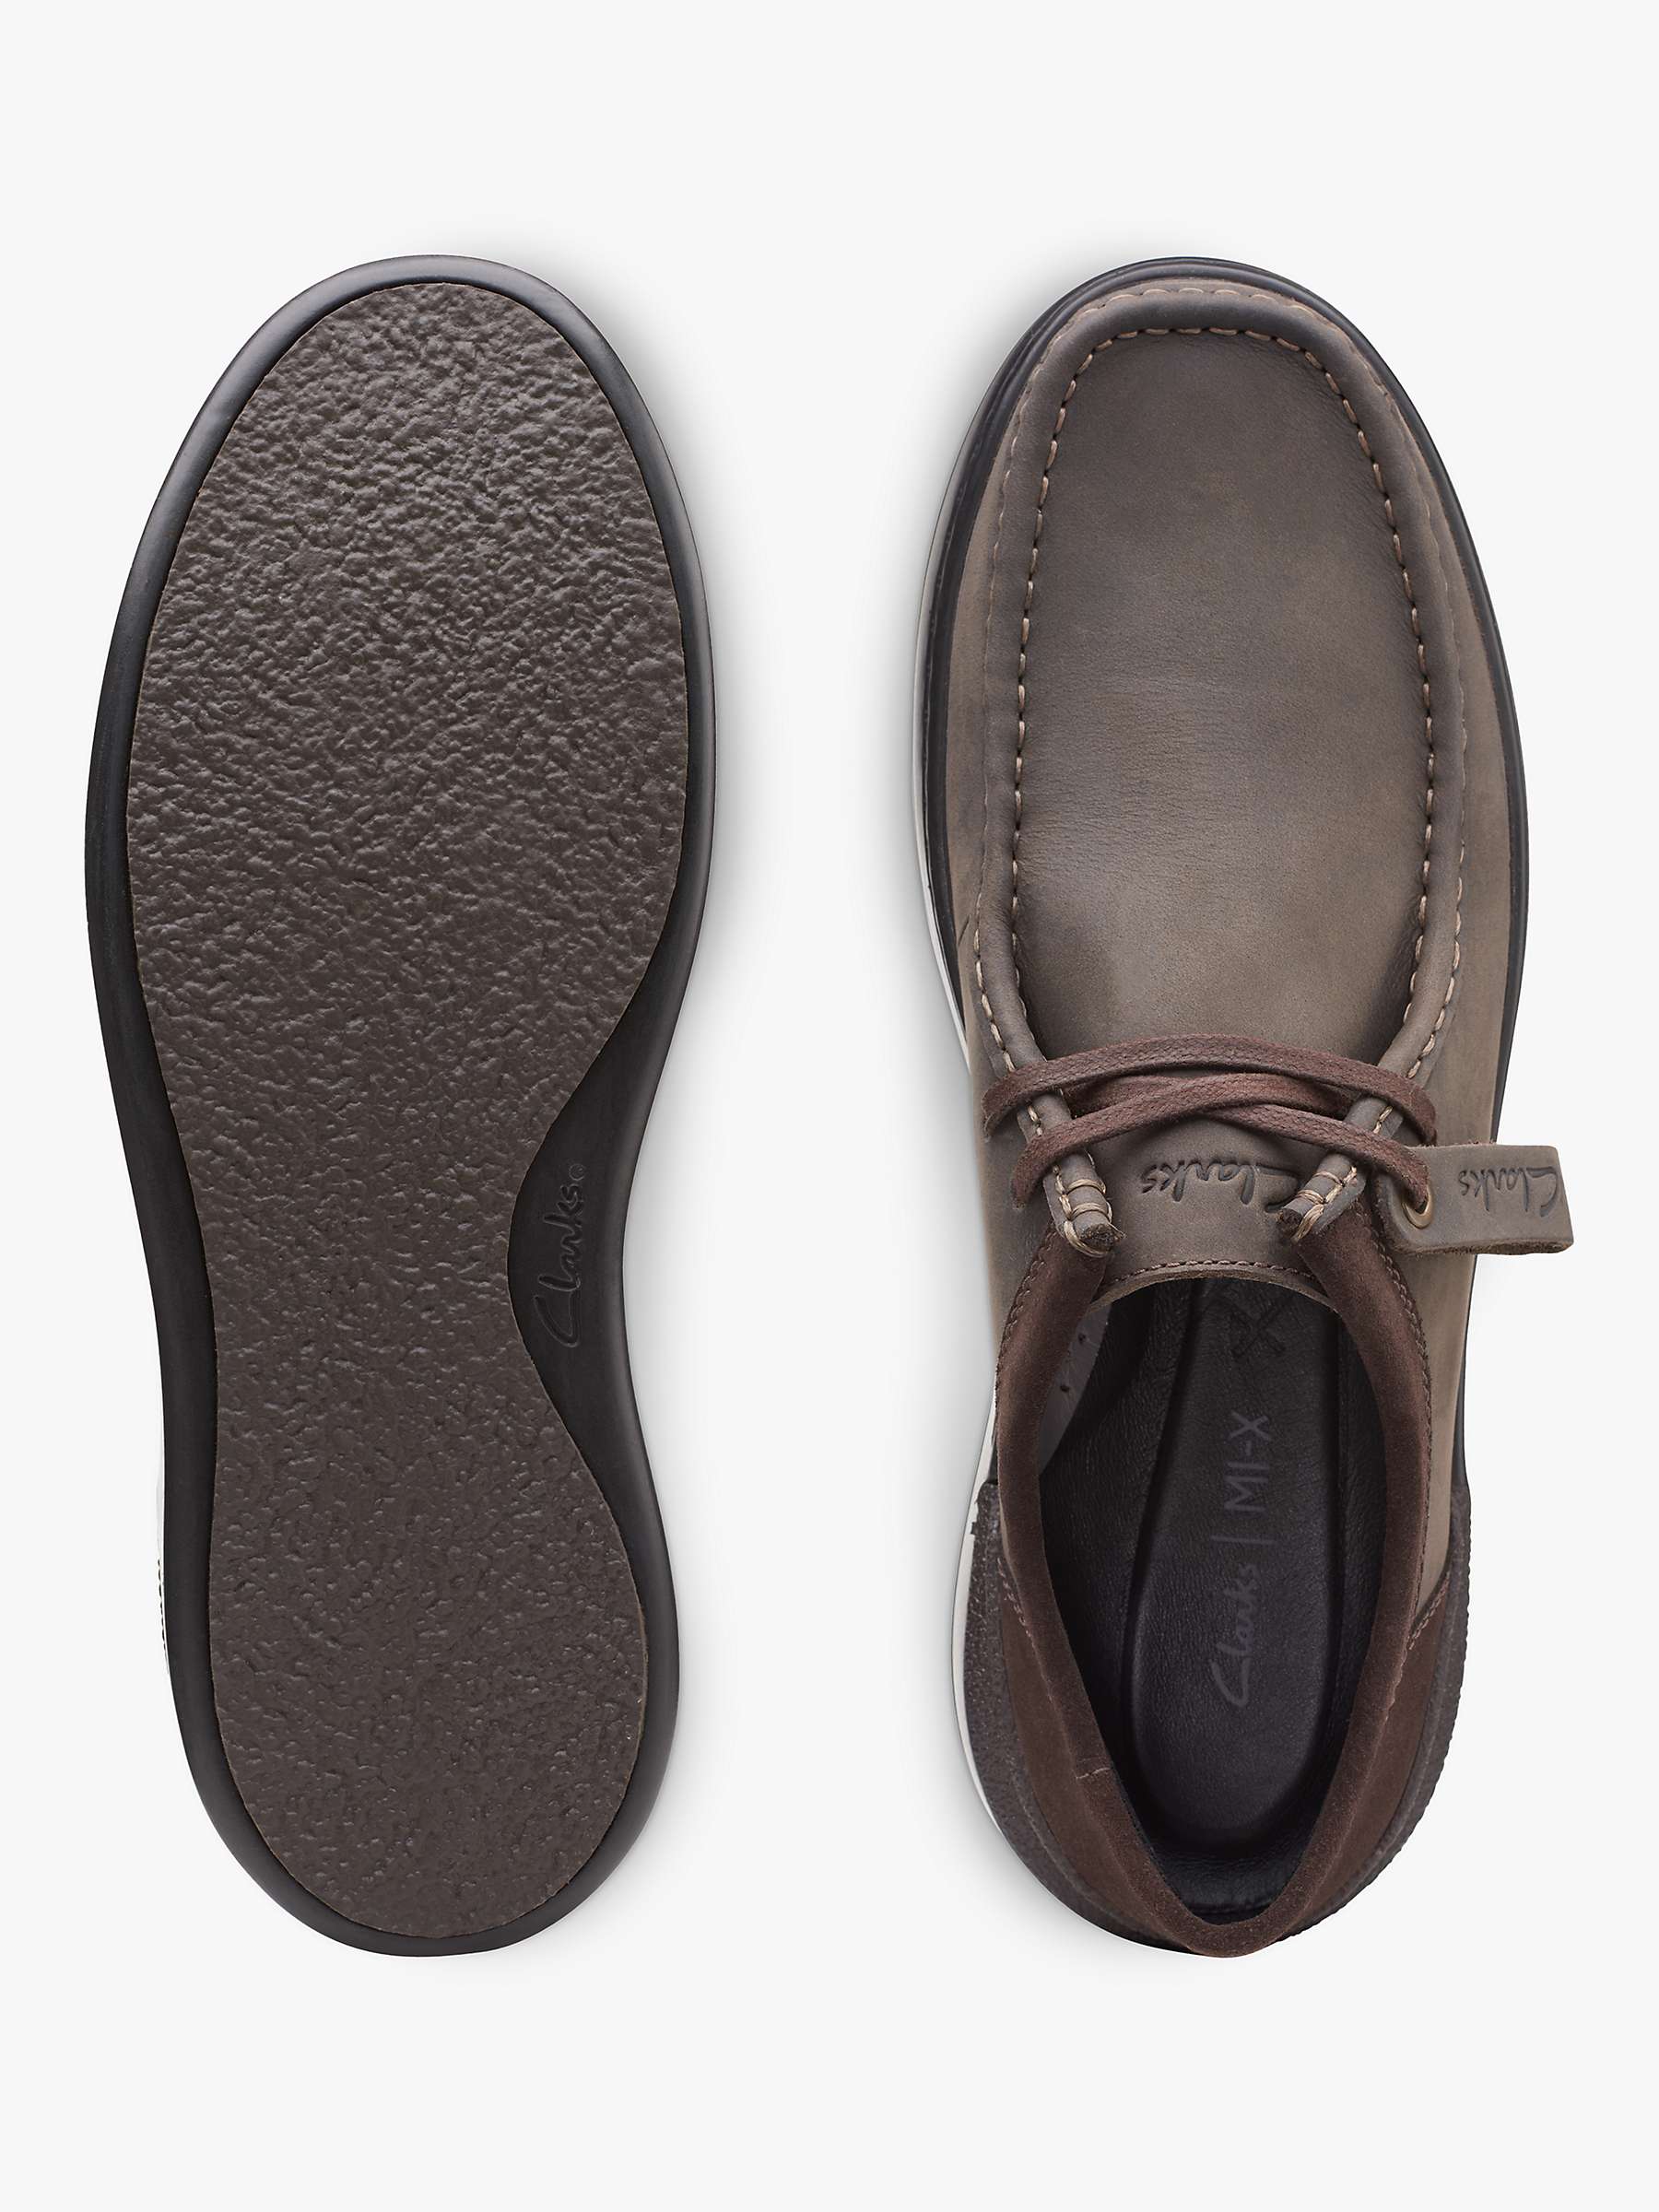 Clarks CourtLite Wally Leather Lace Up Trainers, Brown at John Lewis ...